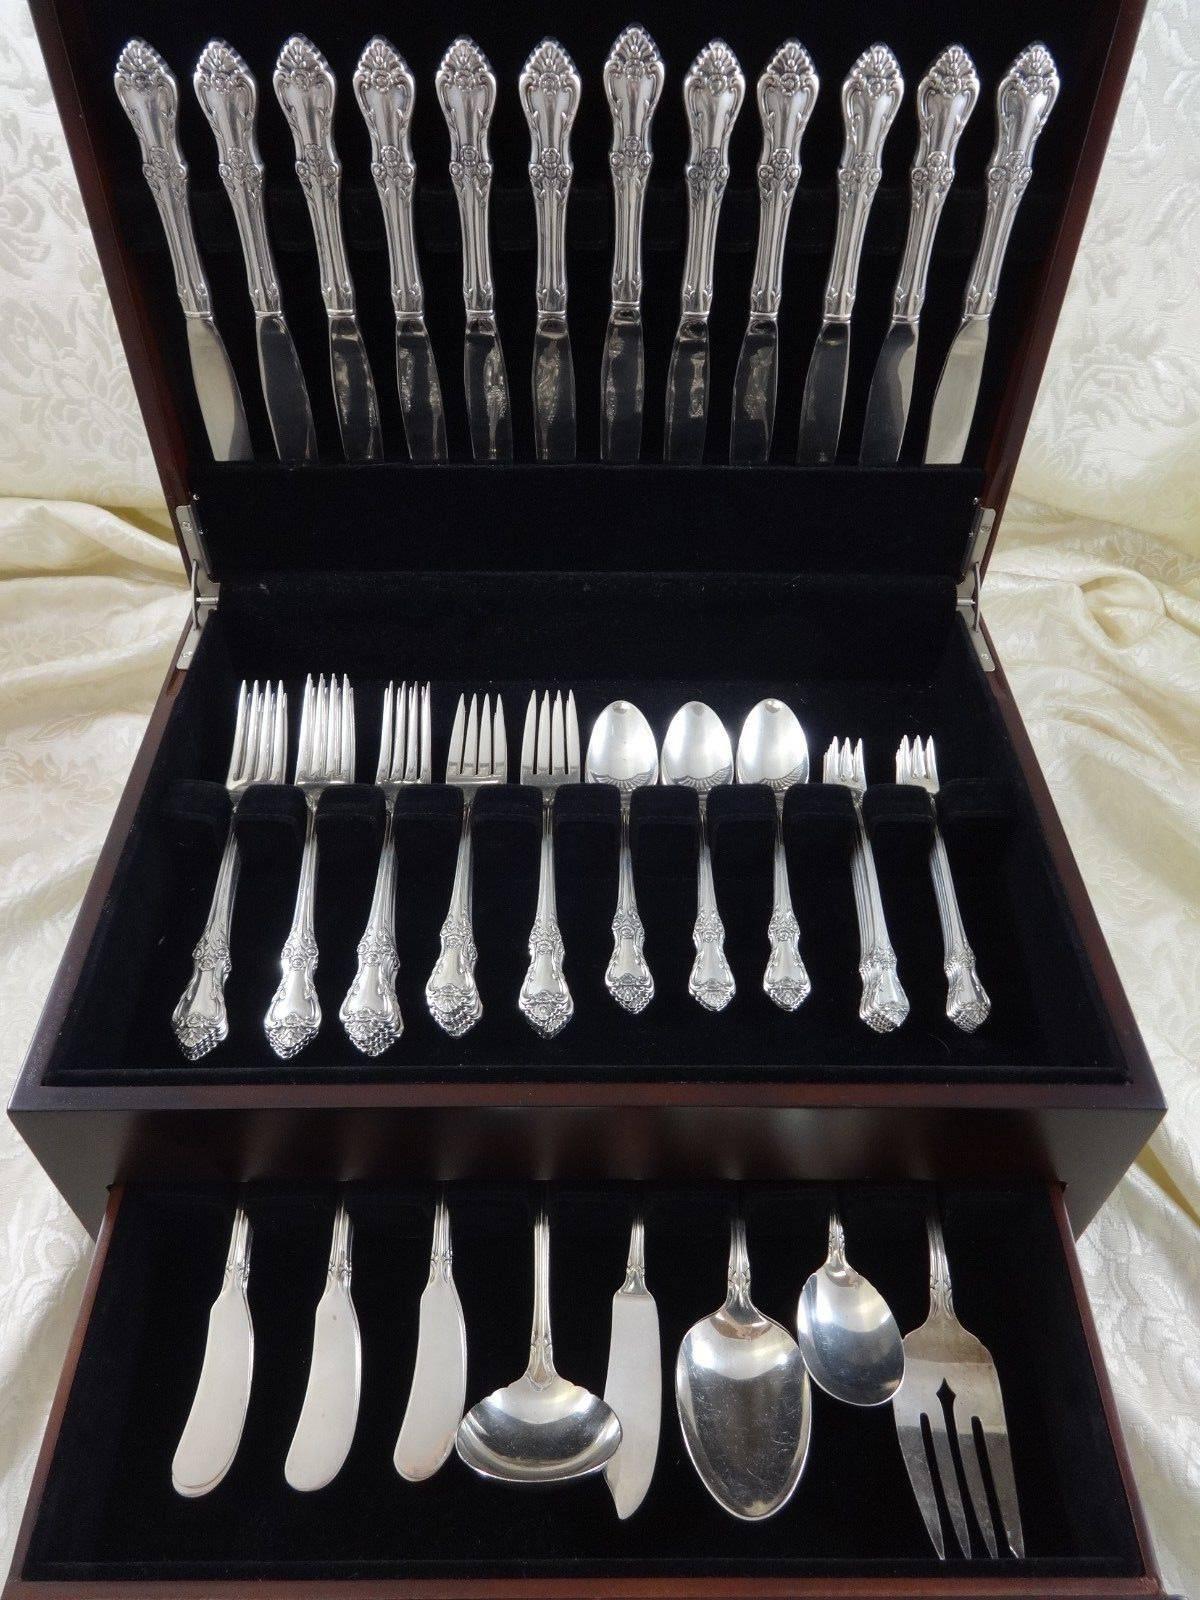 Large Afterglow by Oneida sterling silver Flatware set for 12 - 78 Pieces. This set includes:

12 knives, 8 3/4